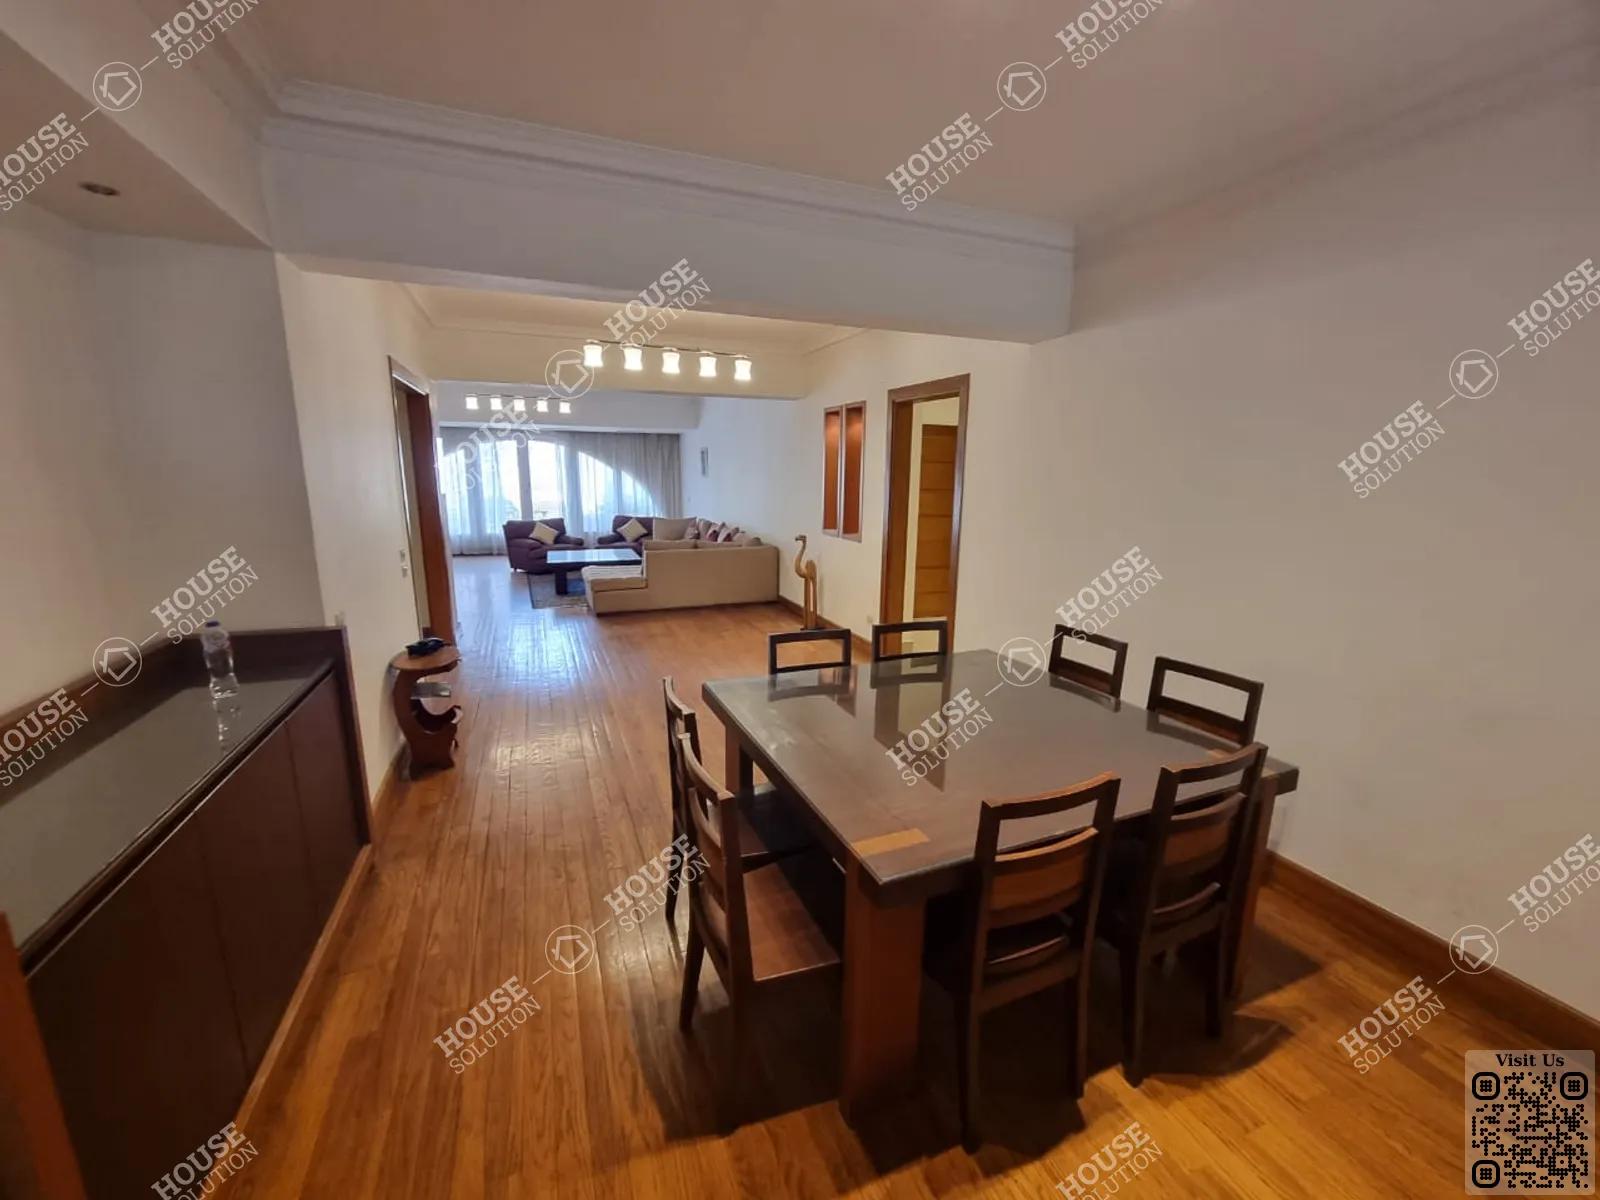 RECEPTION  @ Apartments For Rent In Maadi Maadi Sarayat Area: 250 m² consists of 3 Bedrooms 3 Bathrooms Modern furnished 5 stars #4870-0